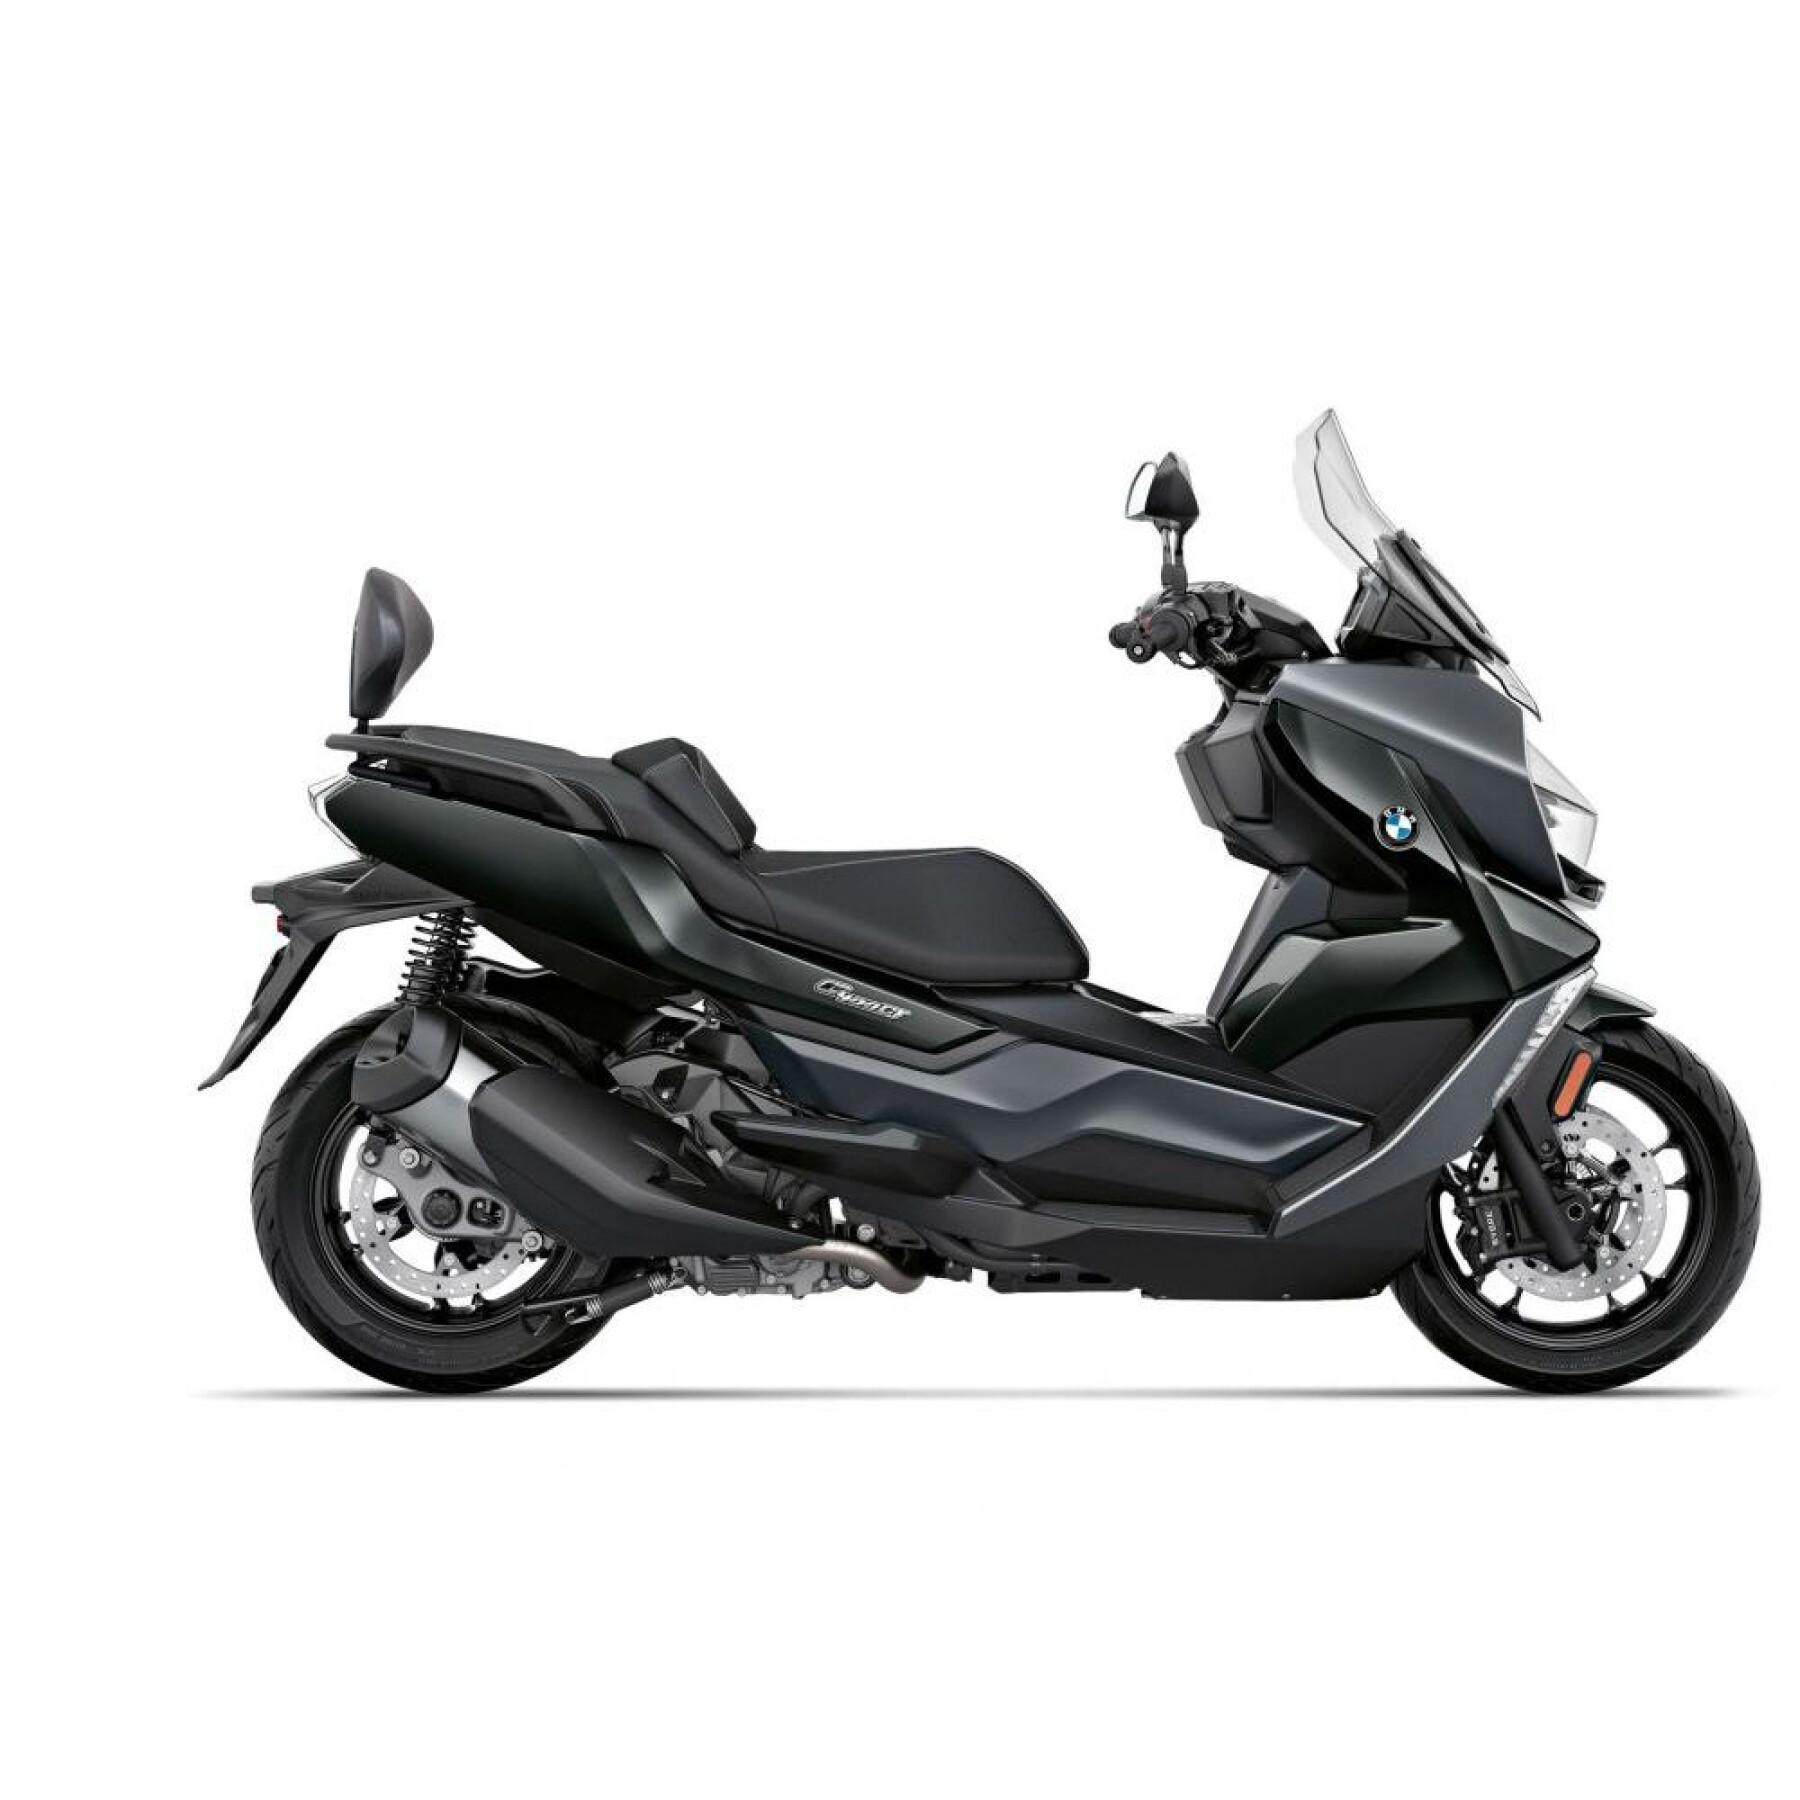 Attacco per schienale scooter Shad BMW c400gt